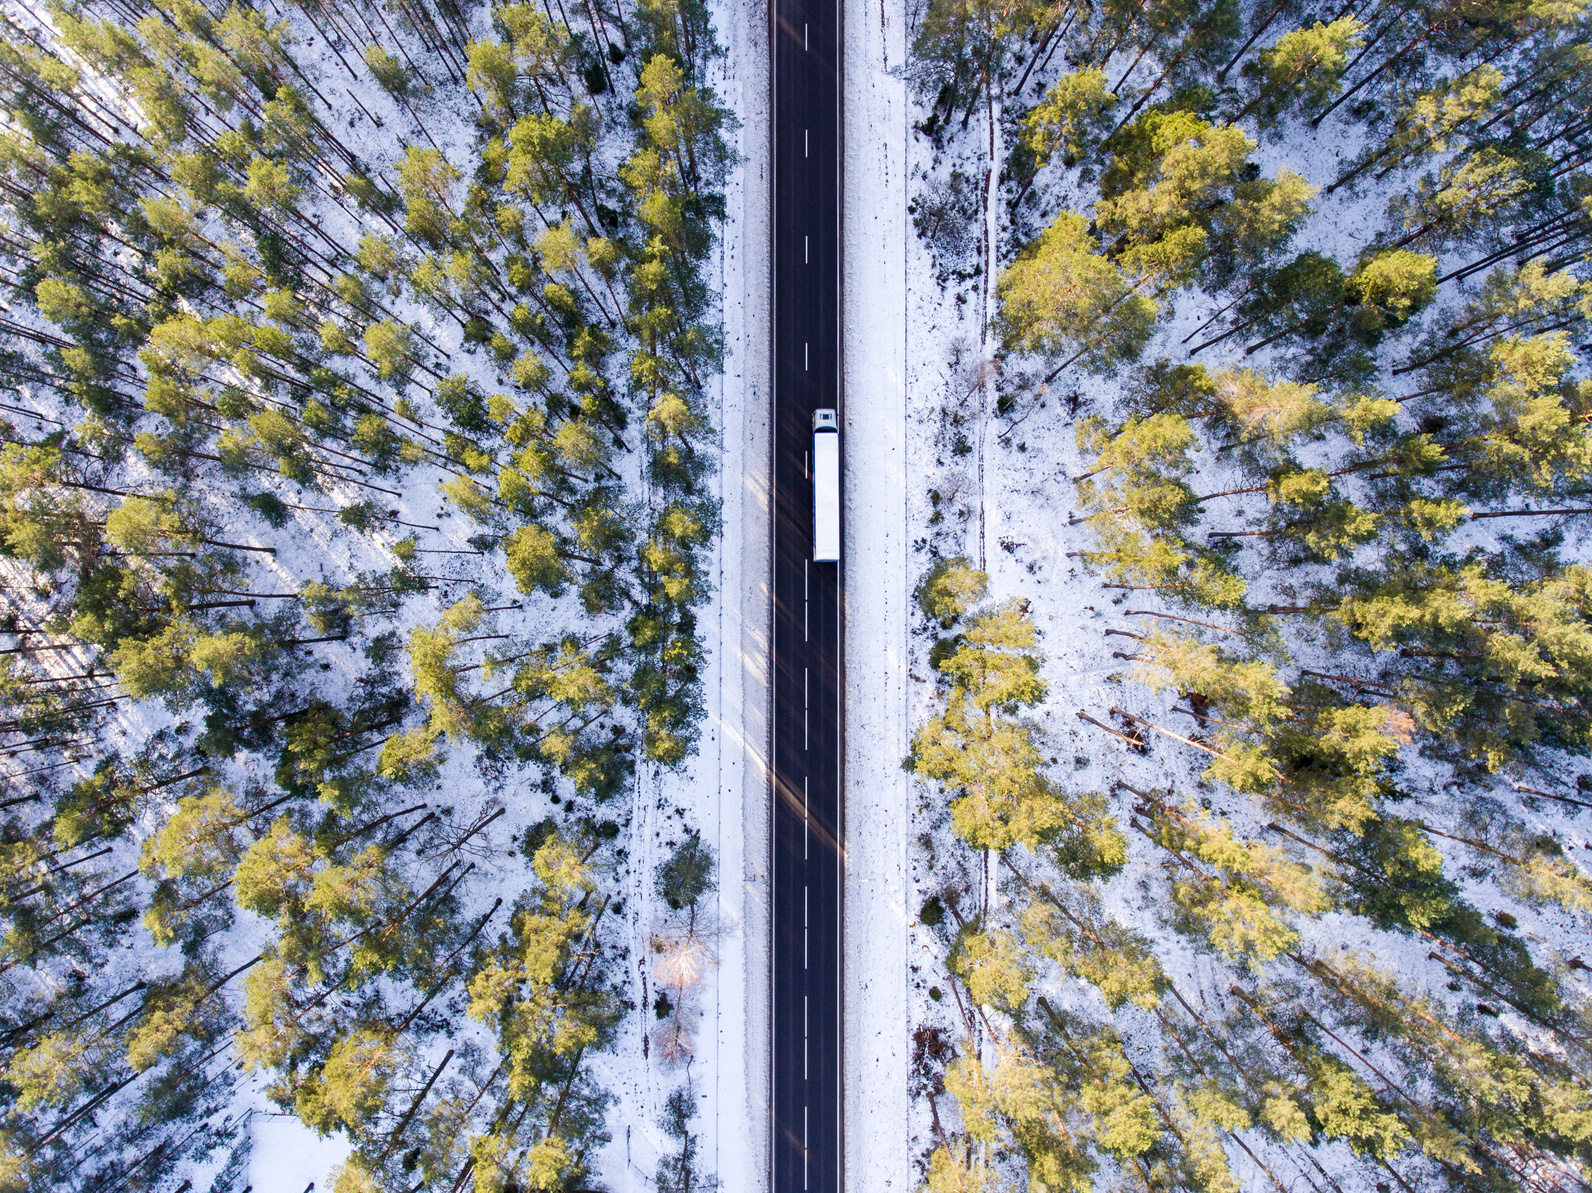 Aerial photo of lorry truck on the road surrounded by winter forest